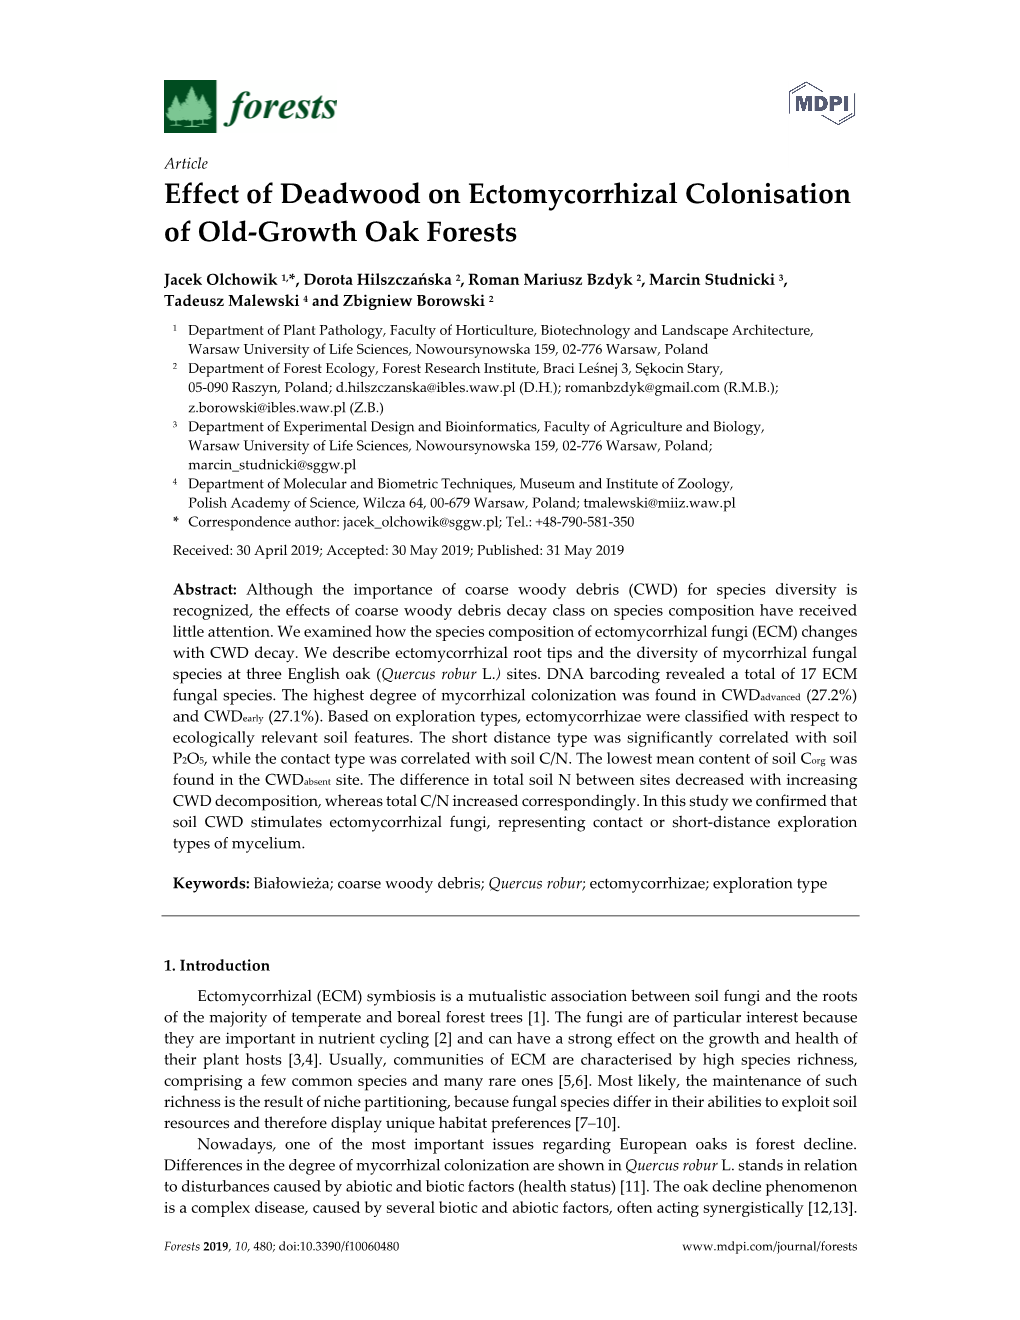 Effect of Deadwood on Ectomycorrhizal Colonisation of Old-Growth Oak Forests